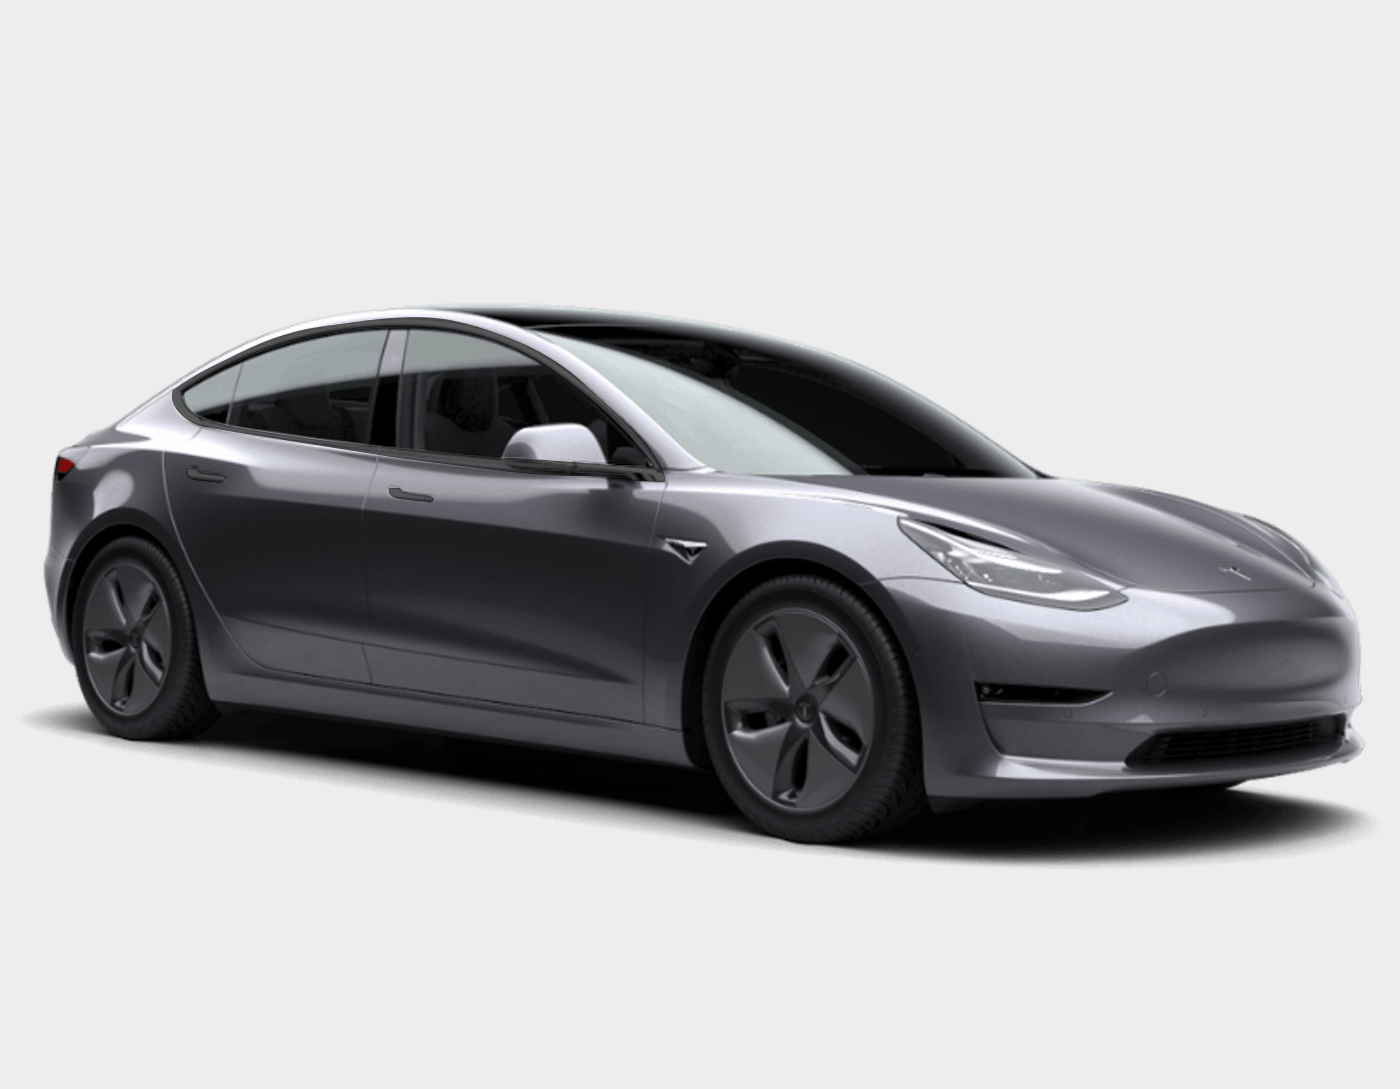 Our alternative to renting the Tesla Model 3LR (Long Range) is the